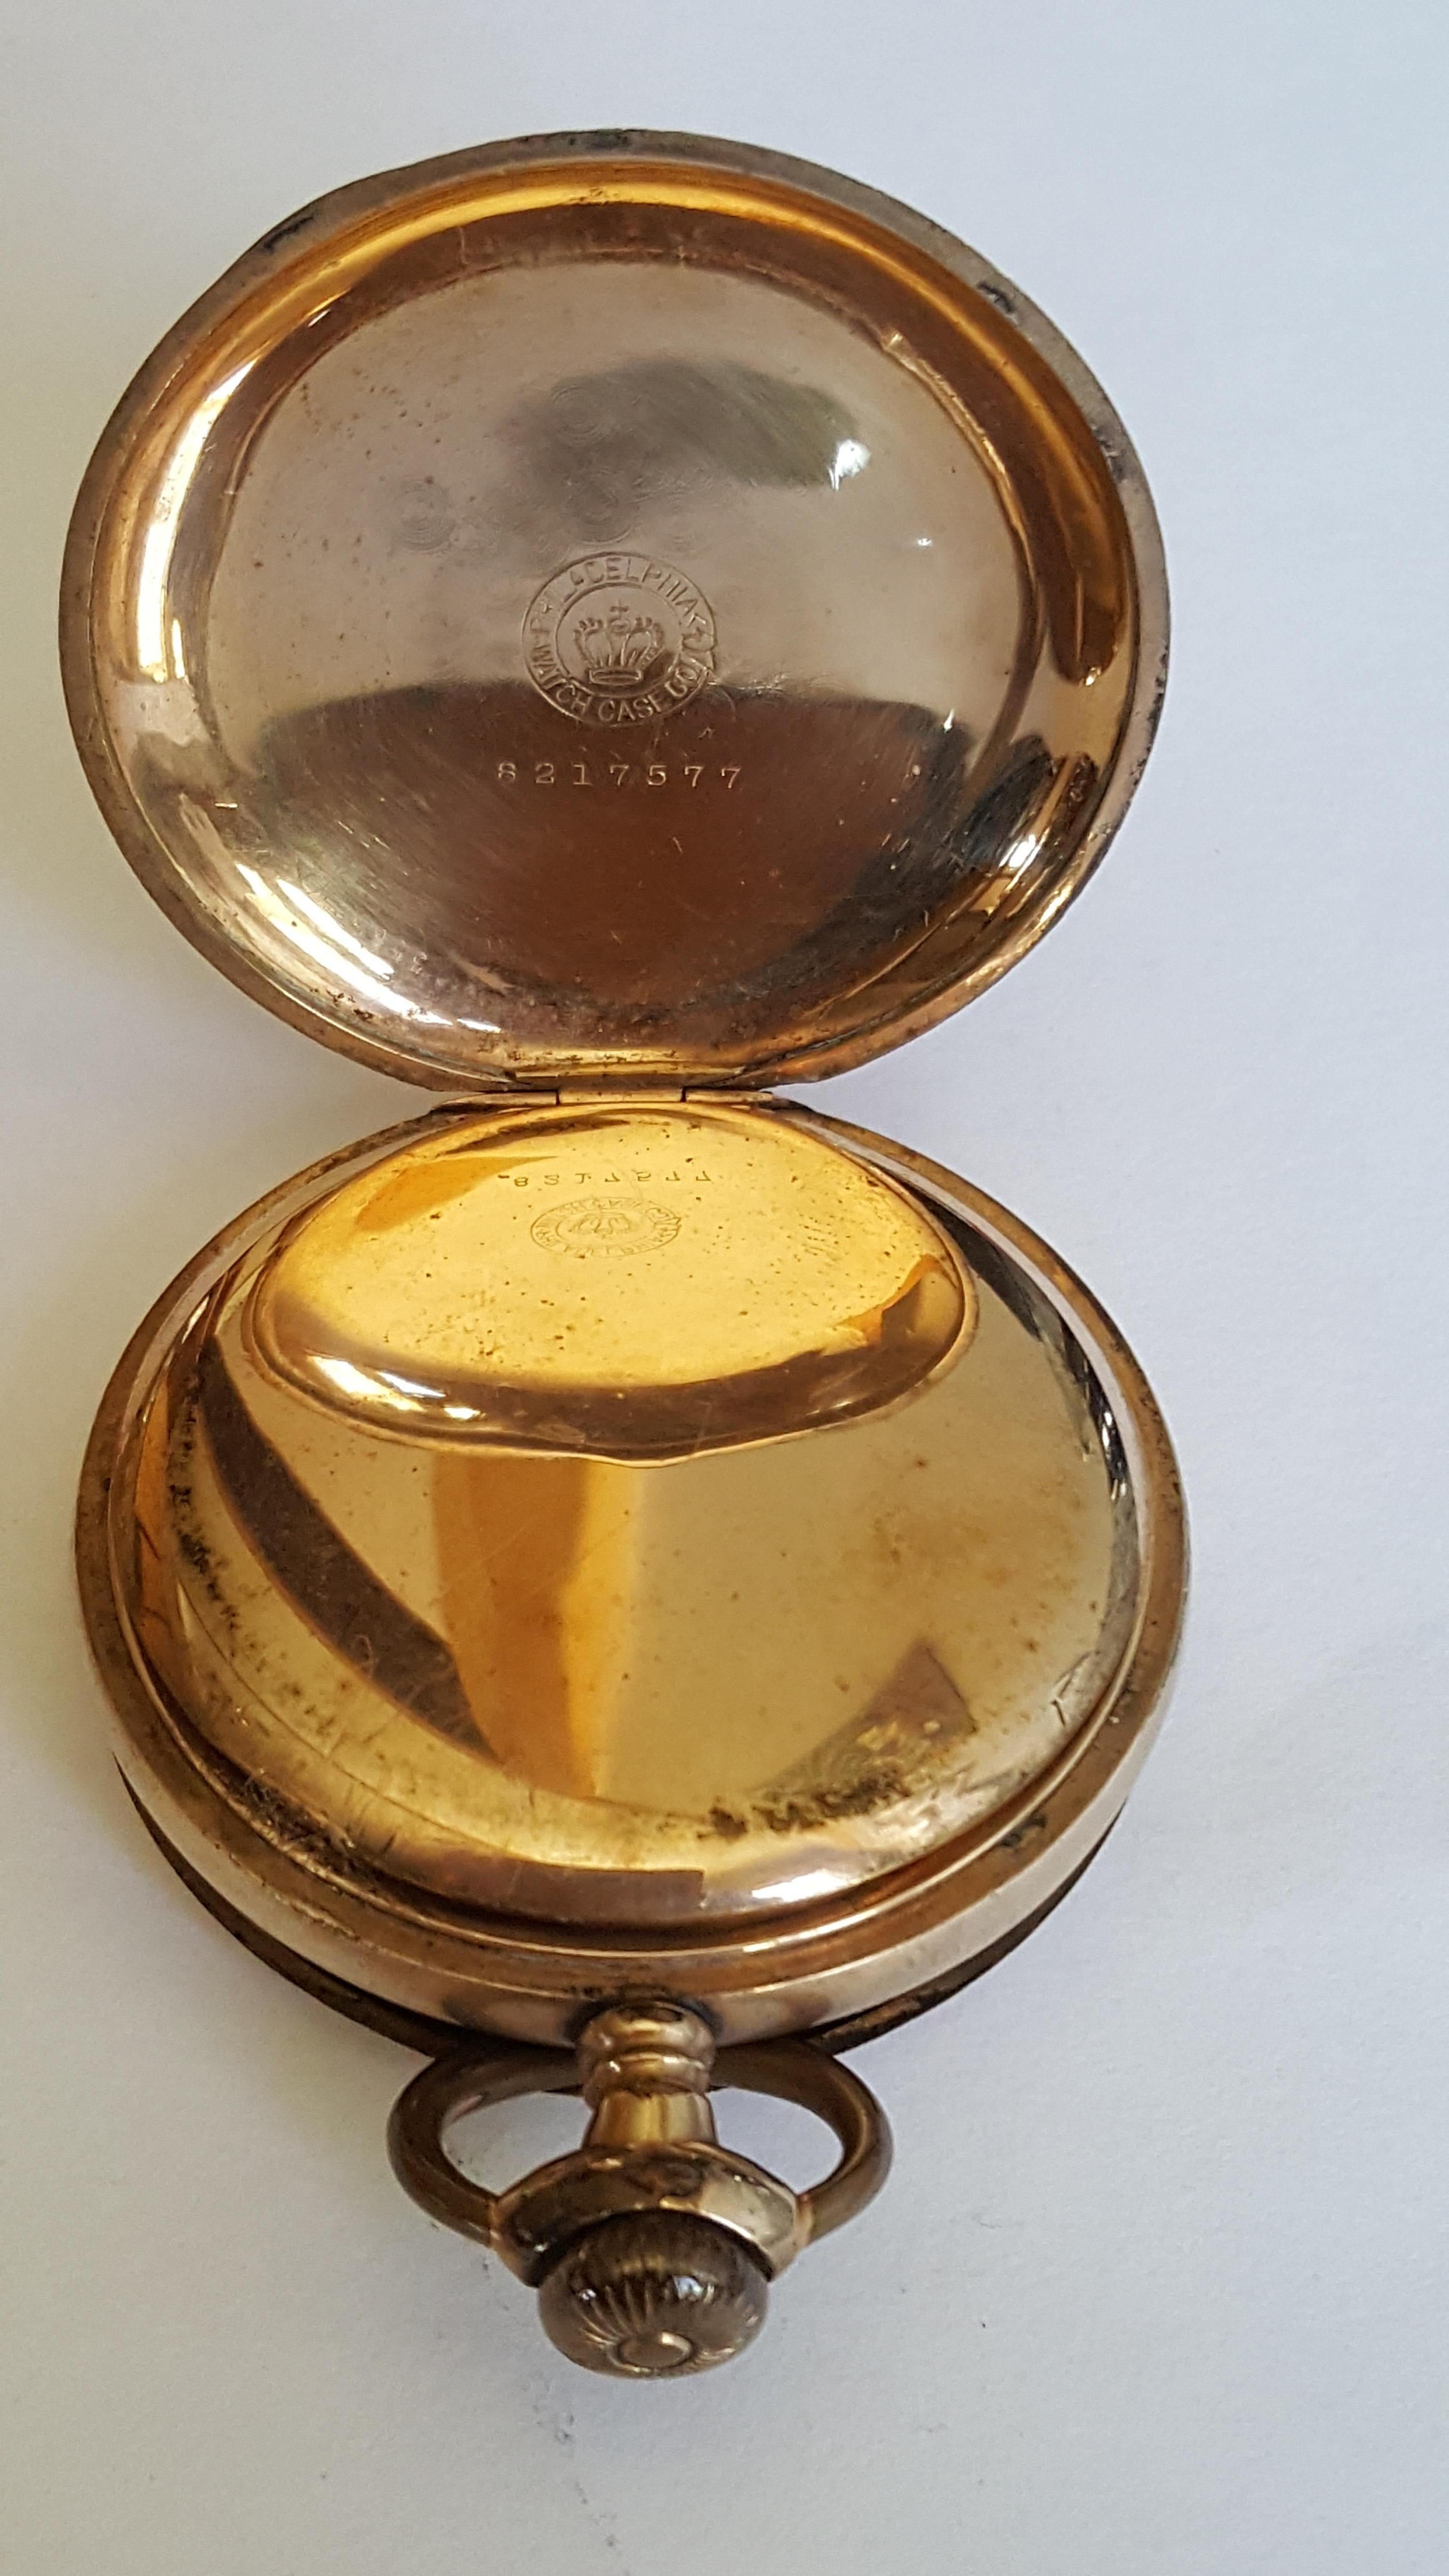 Women's or Men's Vintage Gold-Plated Waltham Pocket Watch, Working, Year 1907, 7Jewel, Model 1899